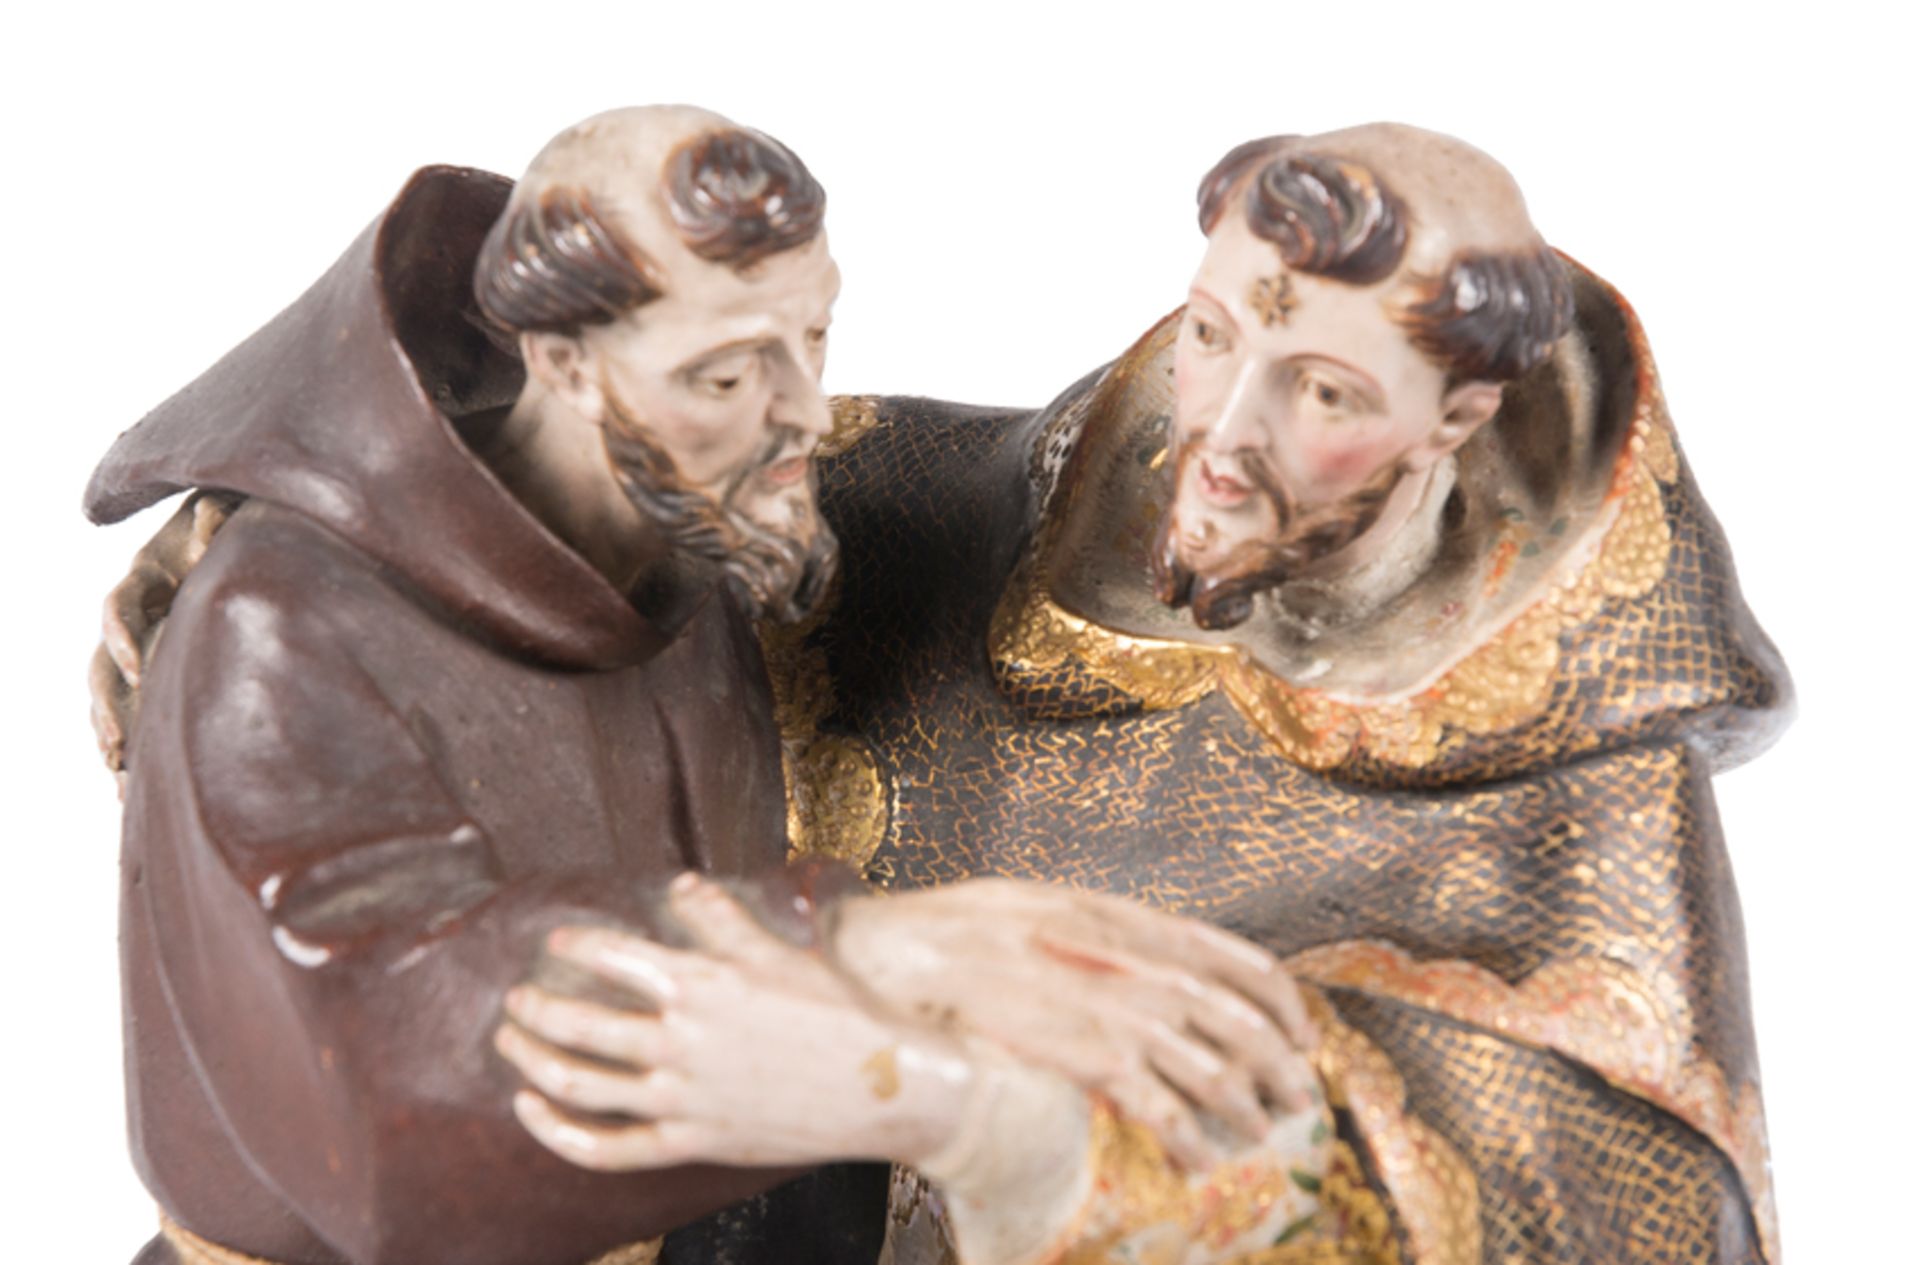 "The Embrace of Saint Francis and Saint Dominic”. Polychromed and gilded terracotta sculpture. Andal - Bild 4 aus 11